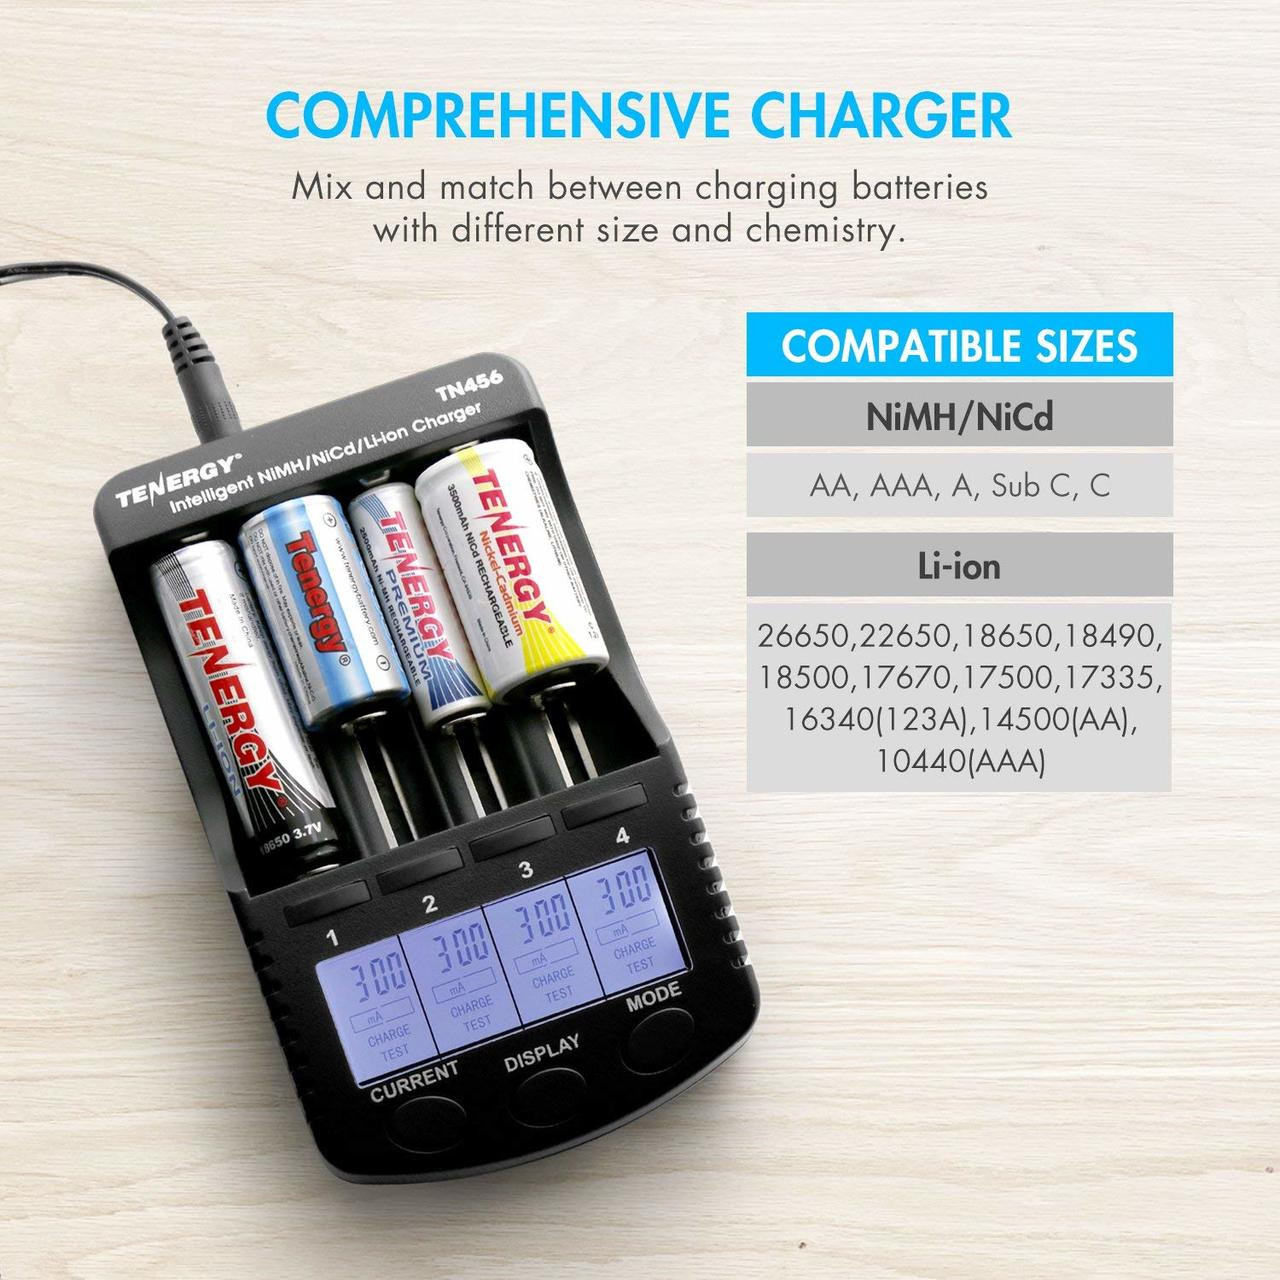 Tenergy TN456 Intelligent Universal Battery Charger for Li-ion/NiMH/NiCd Rechargeable  Batteries, 4-Bay, LCD Screen, USB output